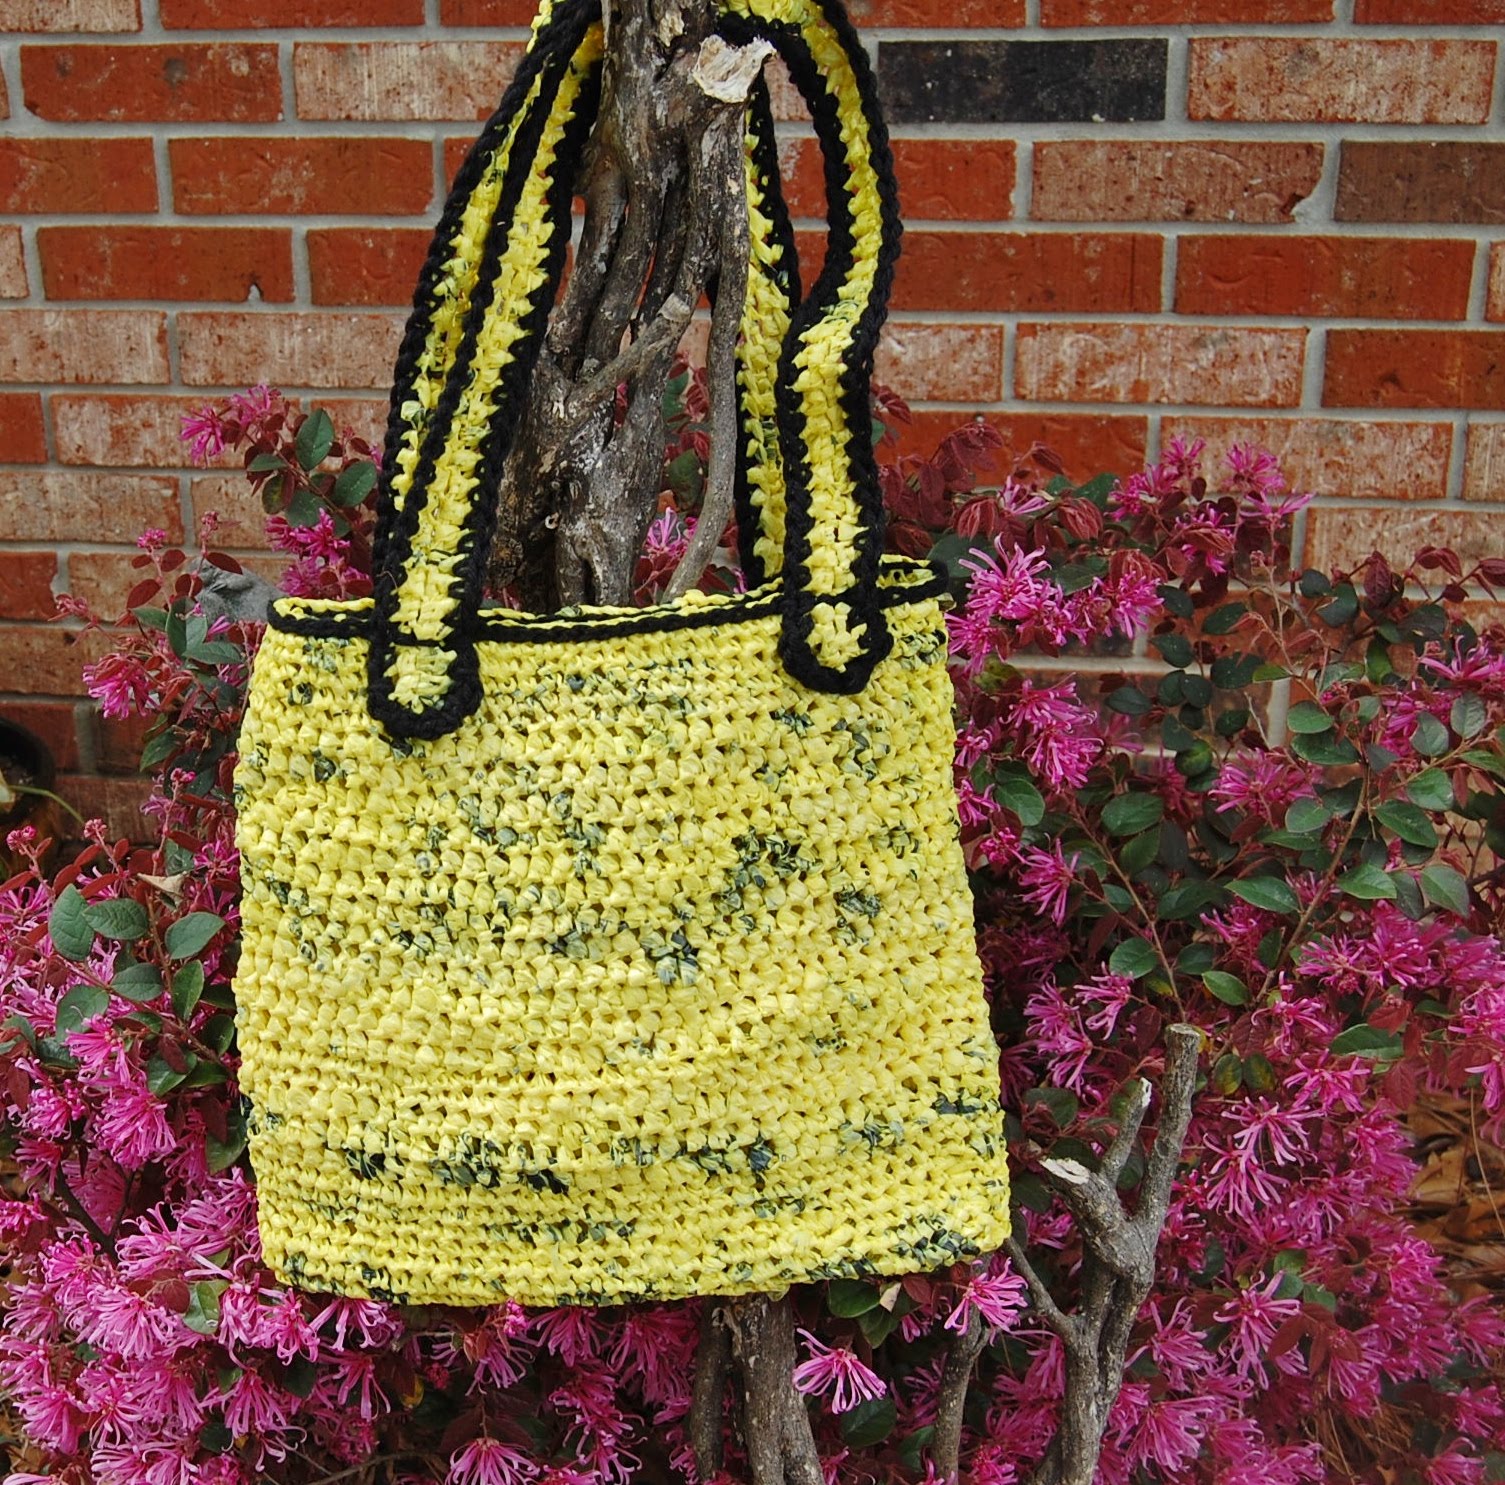 BITS & PIECES: Plarn Crocheted Bags